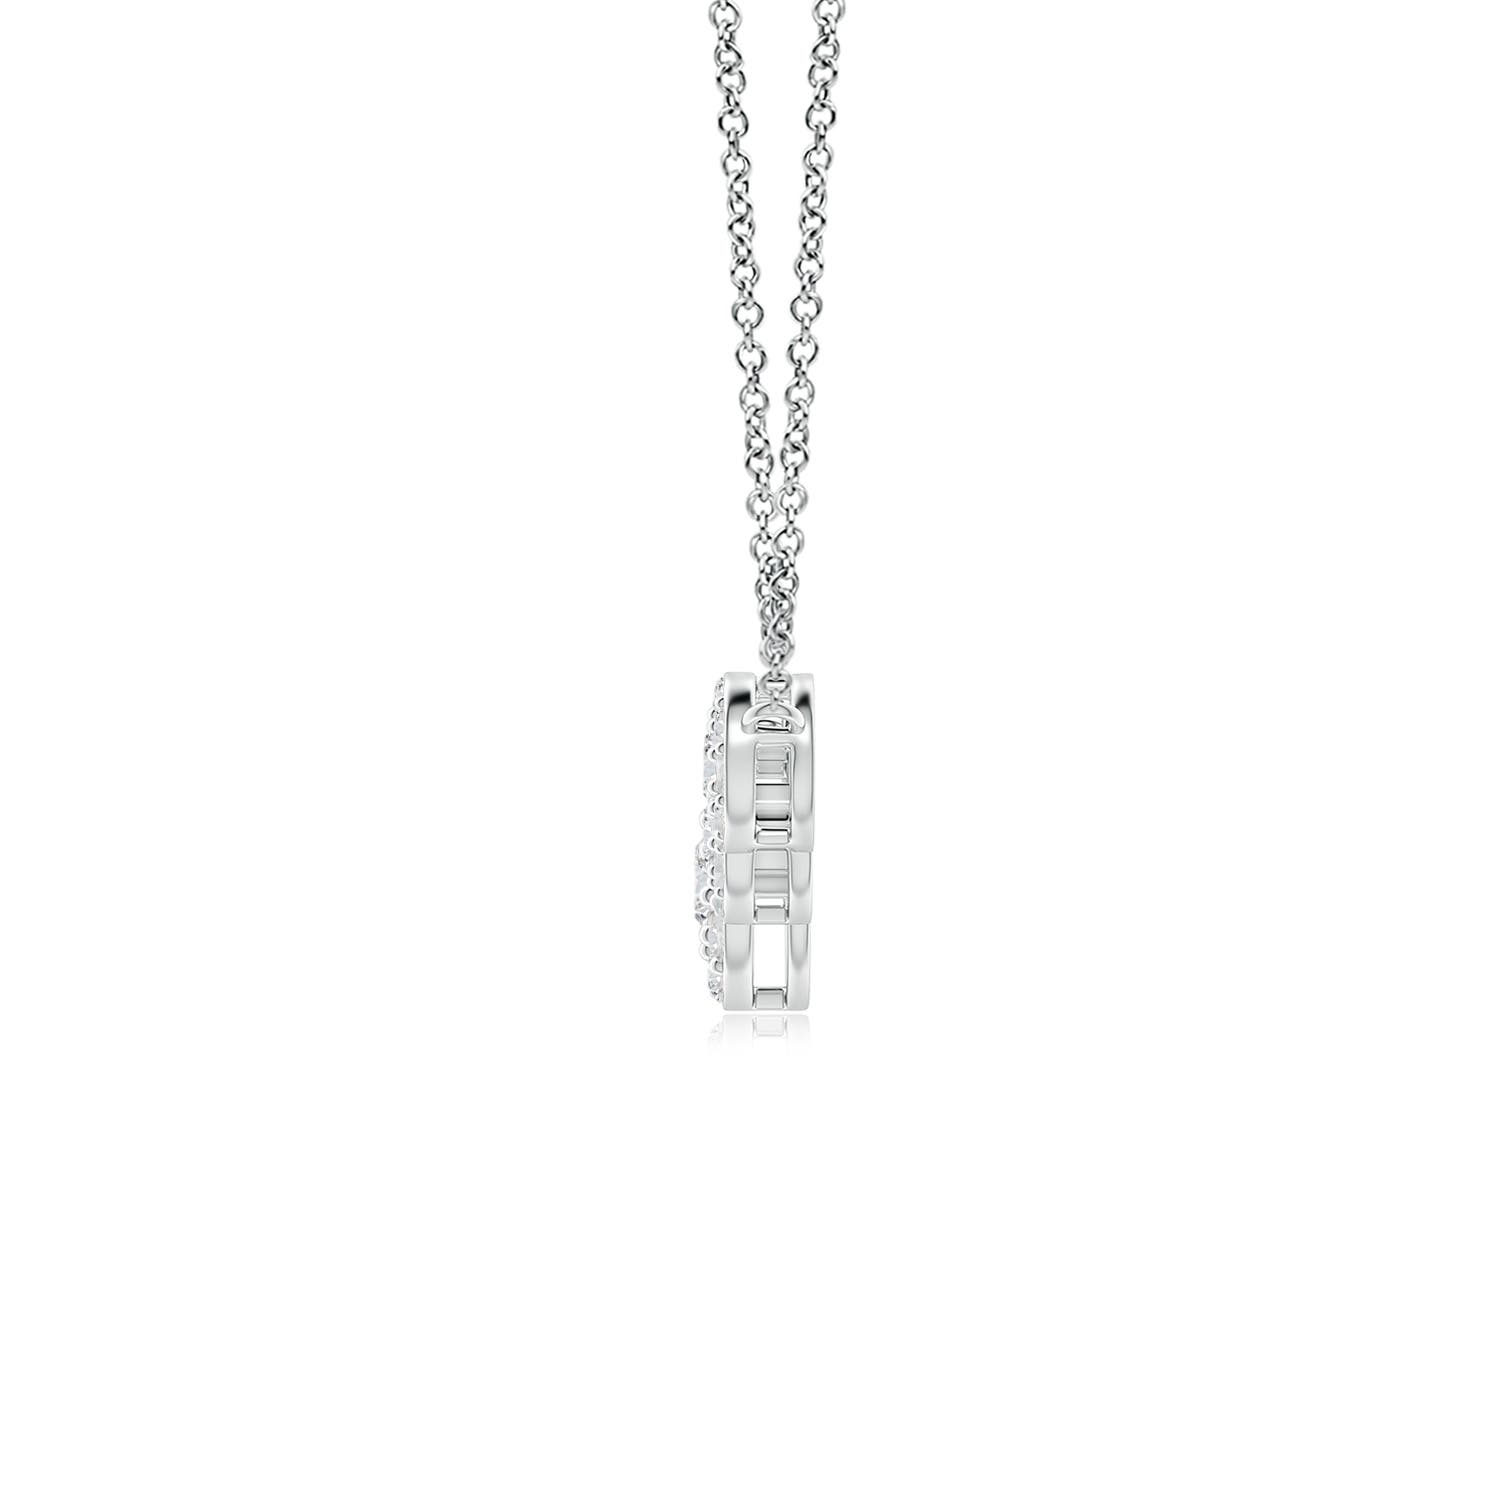 H, SI2 / 2.01 CT / 14 KT White Gold